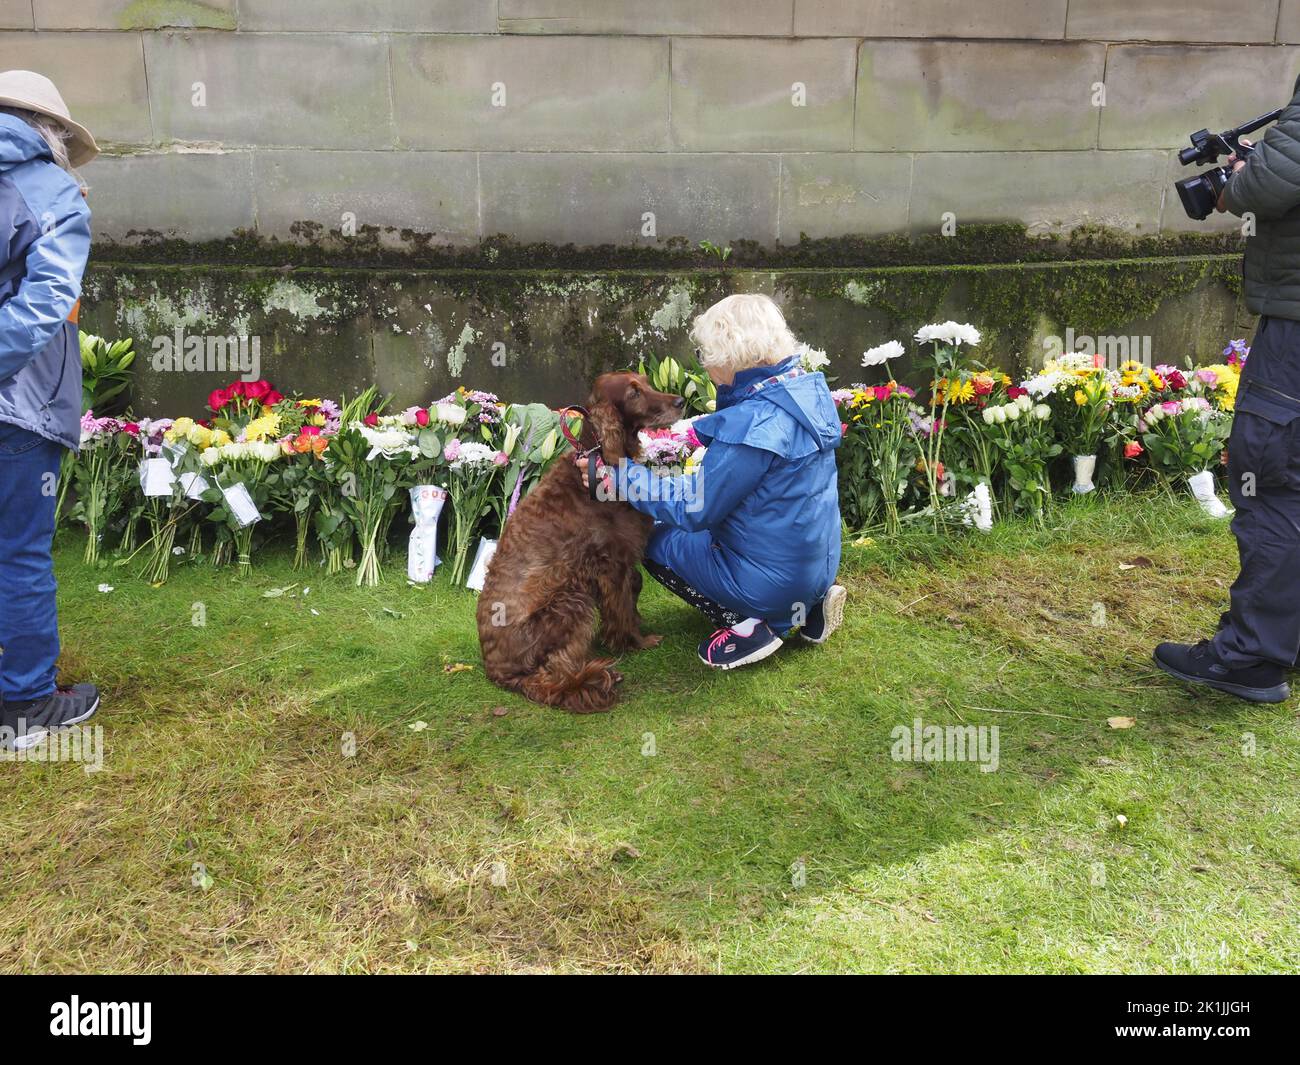 A child with her dog laying flowers for the queen at the Palace of Holyrood house in Edinburgh, Scotland Stock Photo